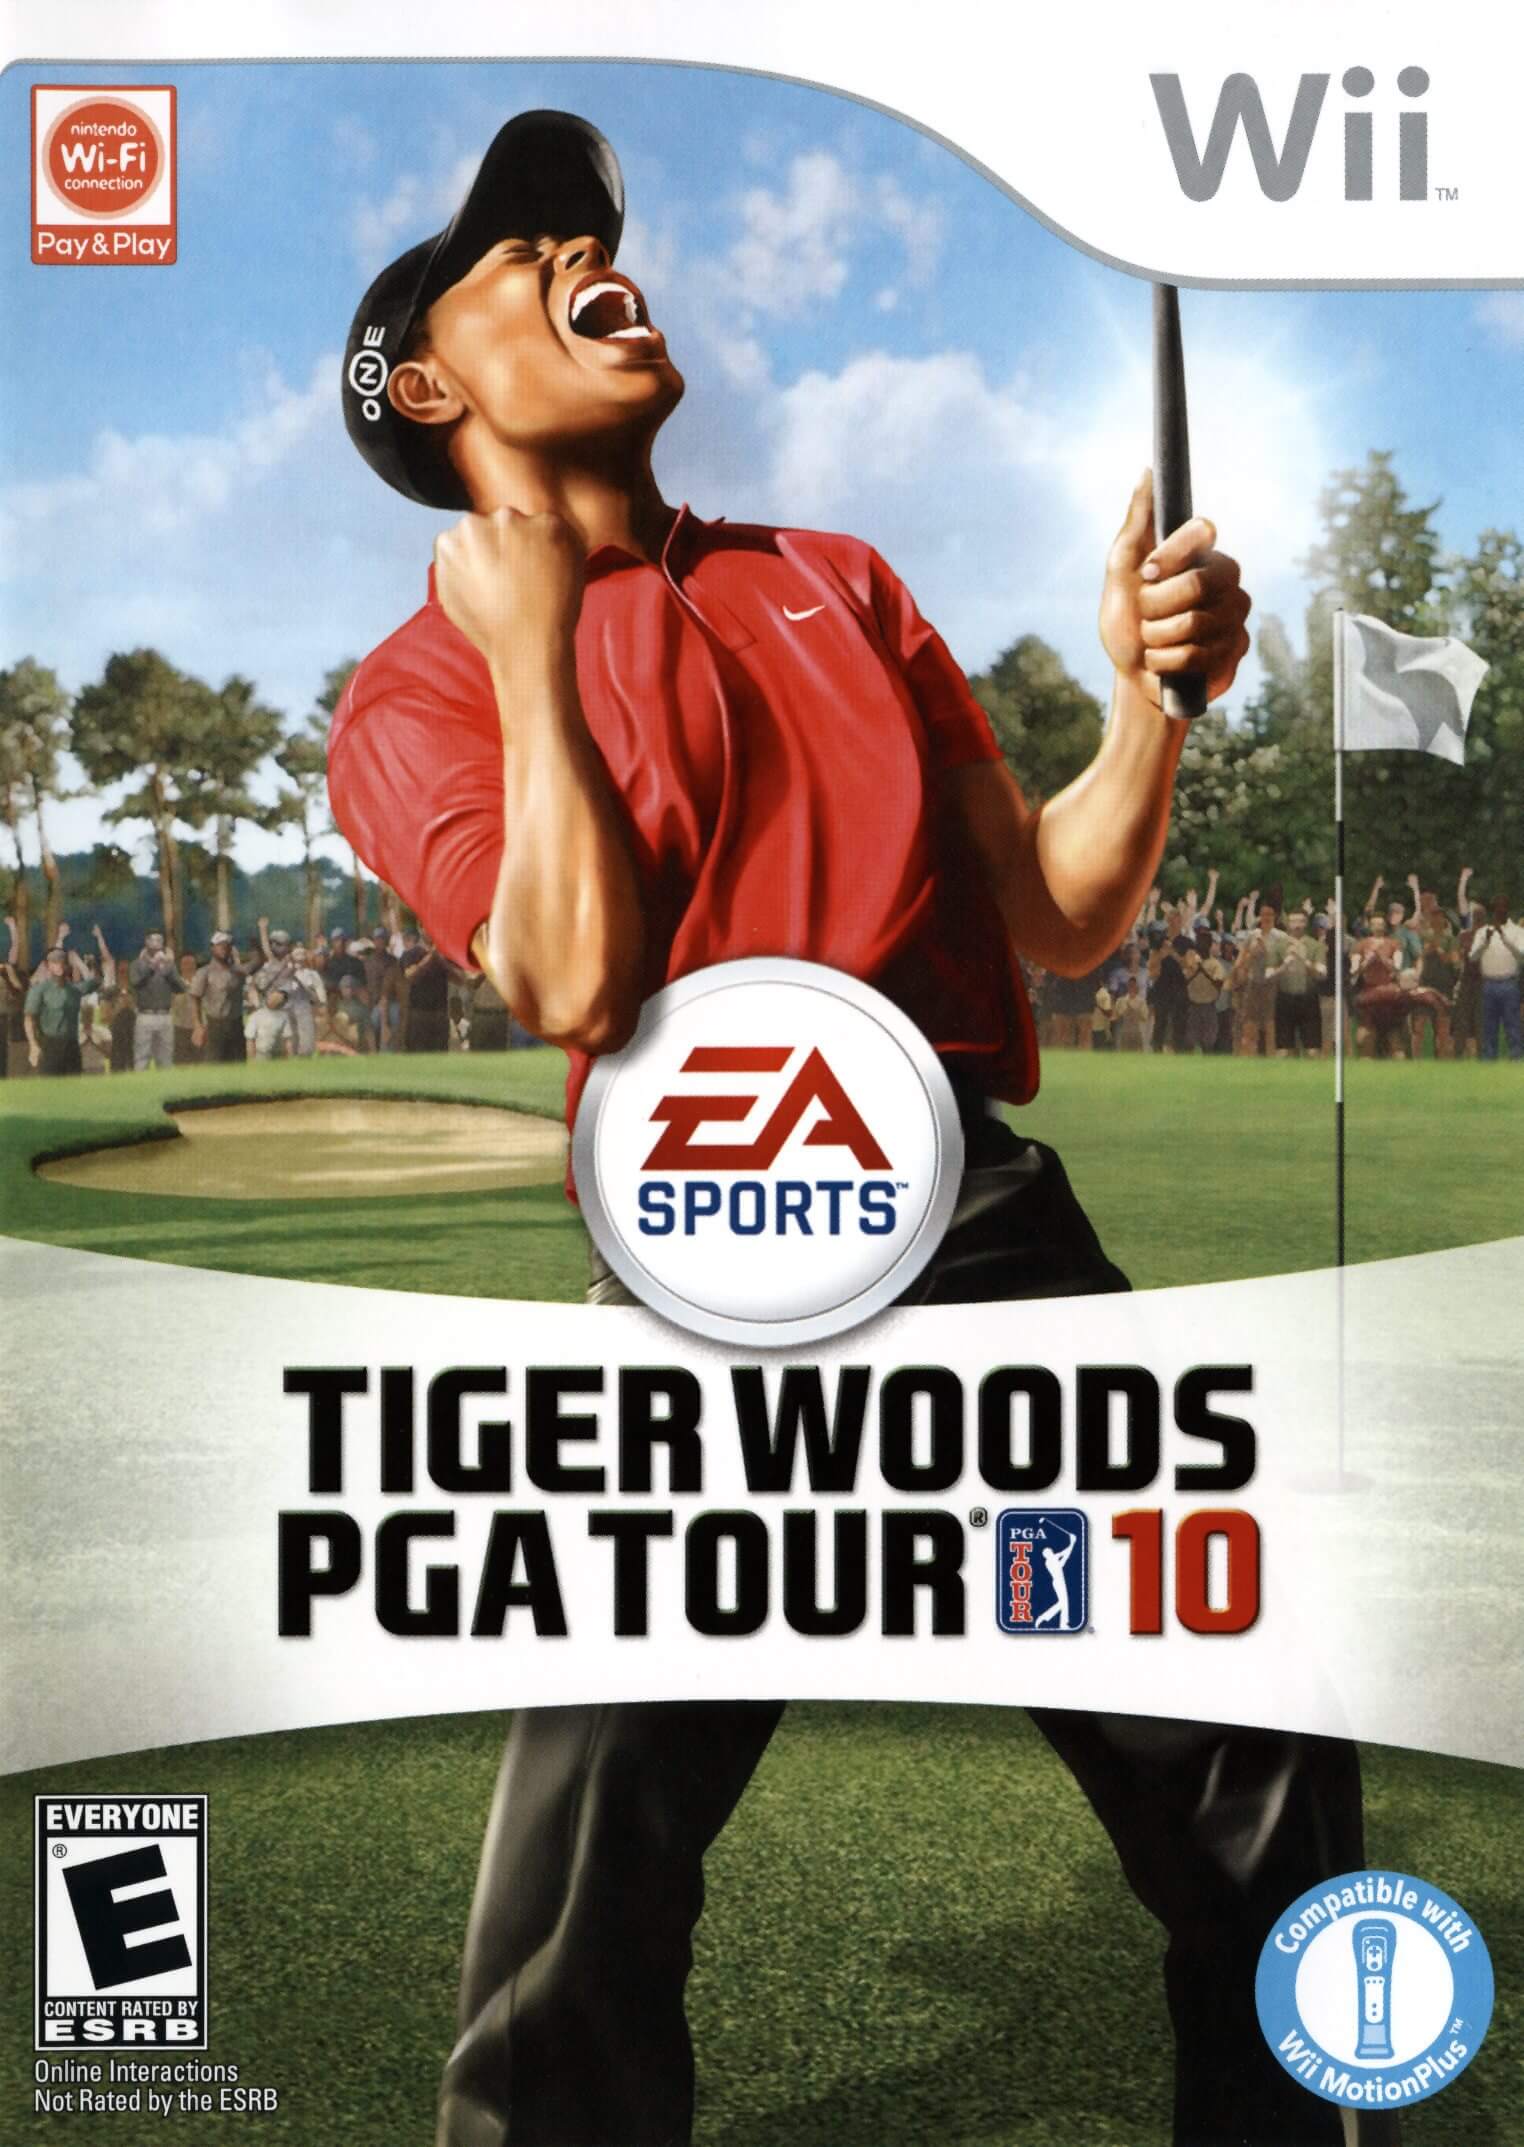 Tiger Woods PGA Tour 10 Wii Game ROM Nkit & WBFS Download